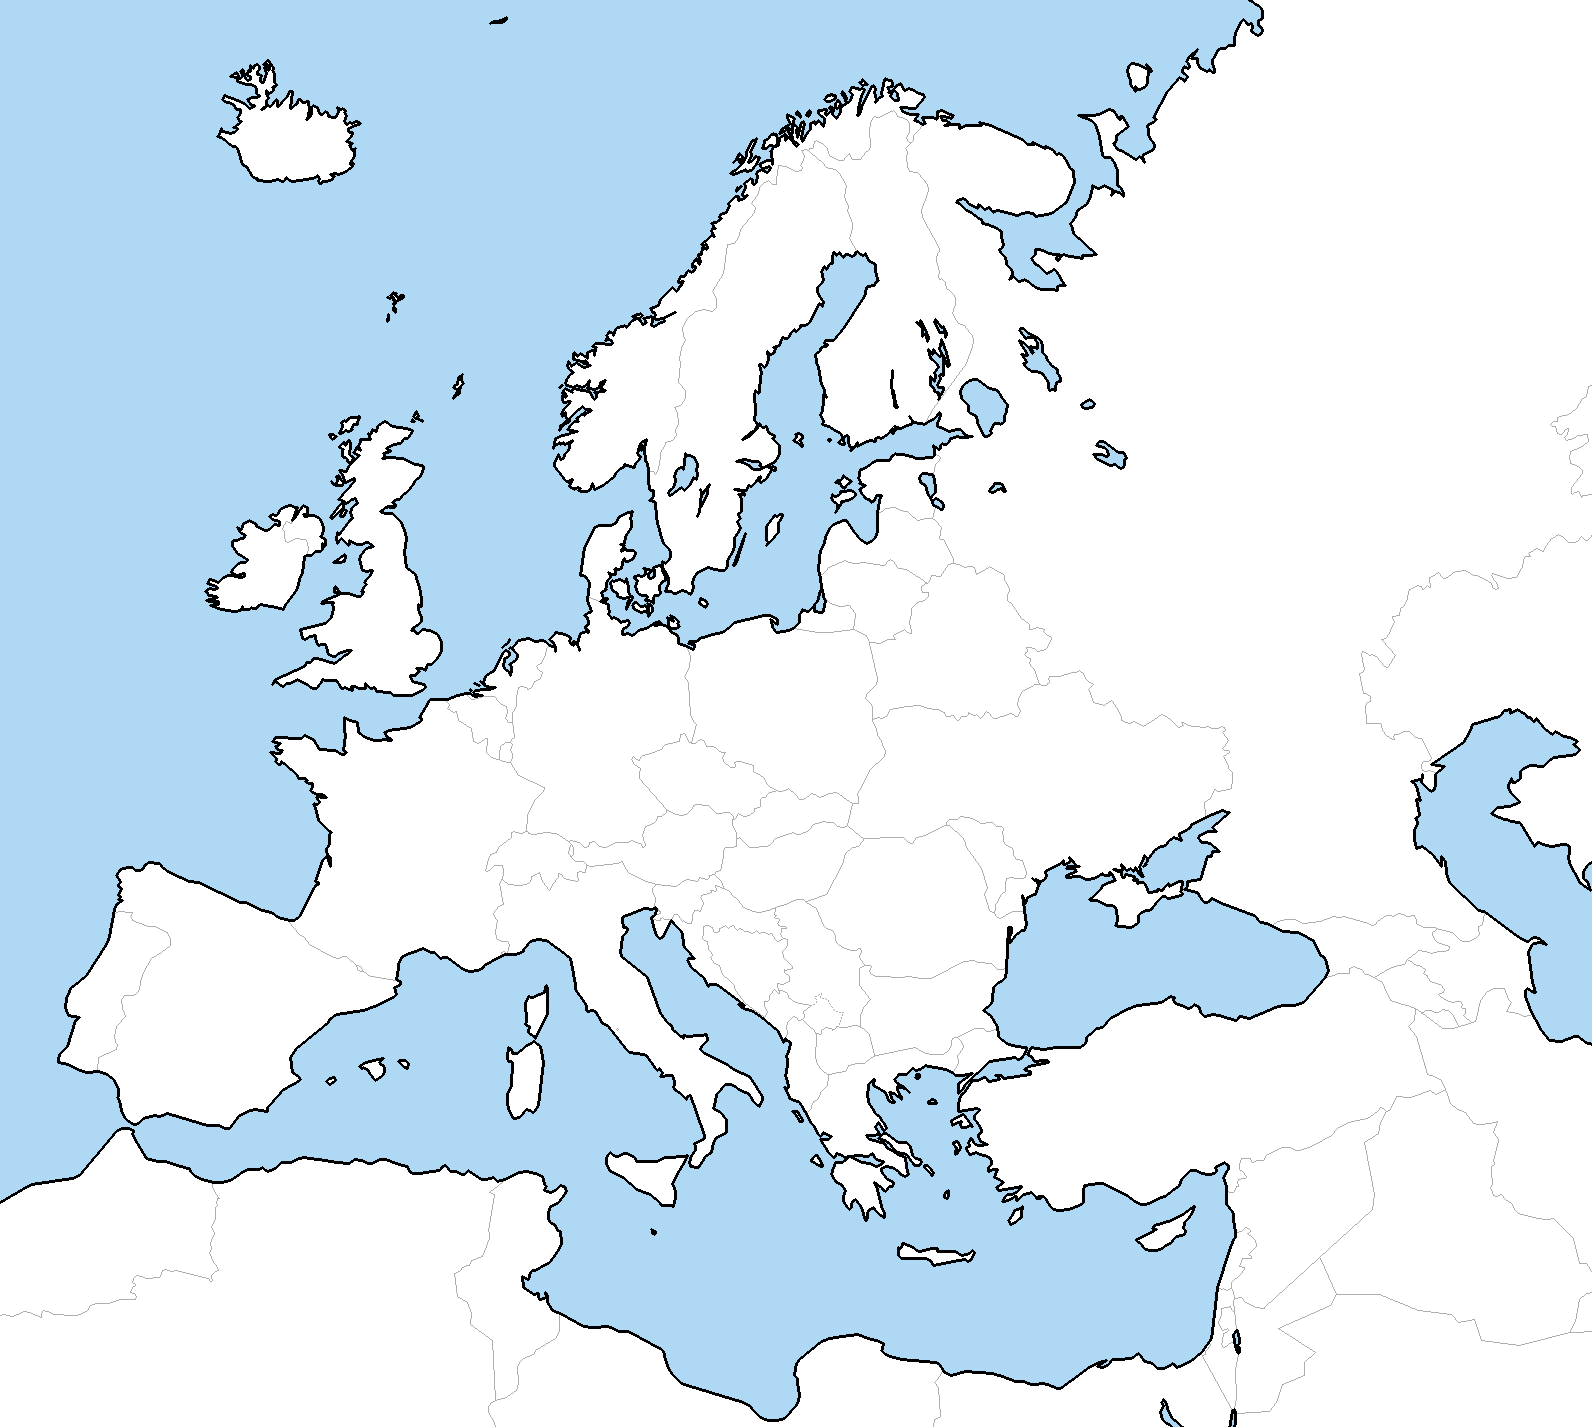 Blank Europe map by Neethis